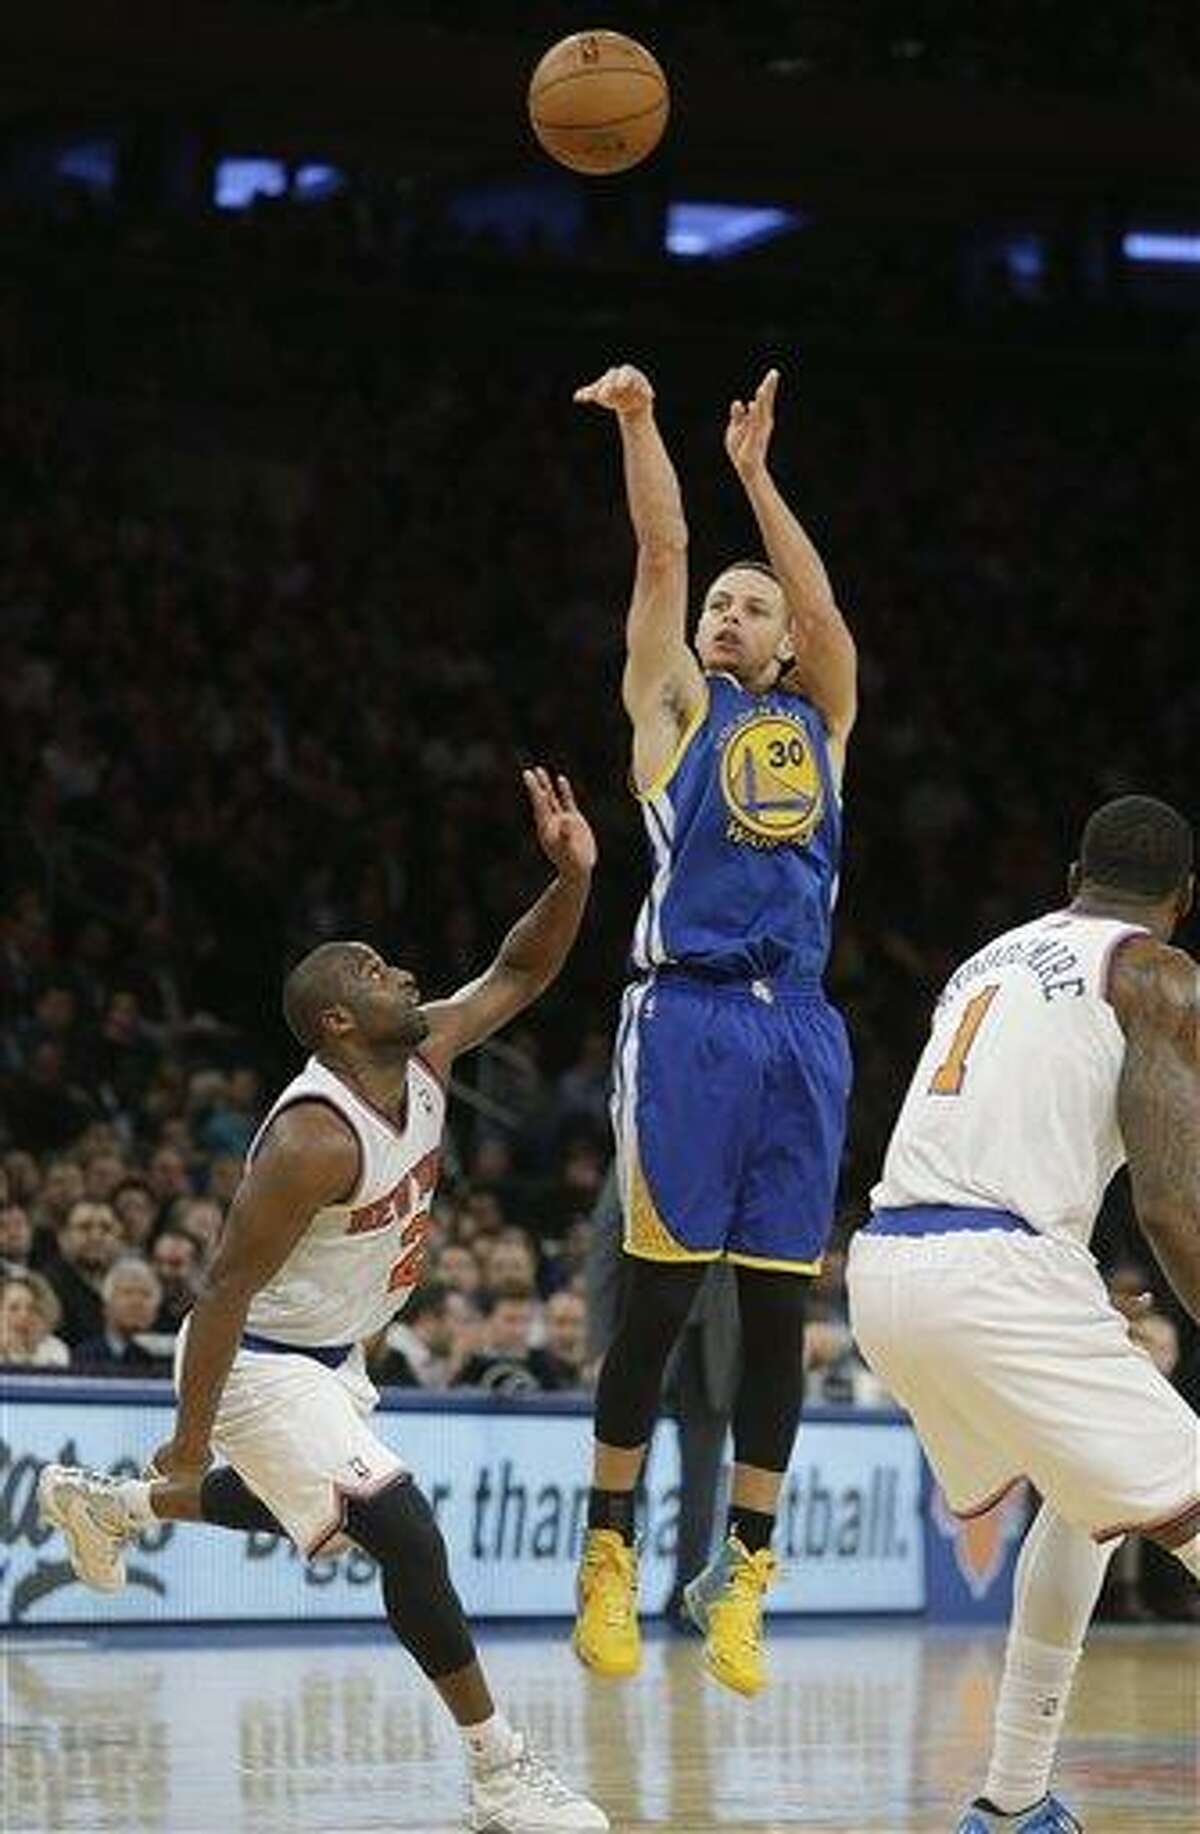 Golden State Warriors' Stephen Curry, center, shoots over New York Knicks' Raymond Felton, left, and Amare Stoudemire, right, during the second half of an NBA basketball game on Wednesday, Feb. 27, 2013, in New York. Curry scored 54 points. The Knicks won the game 109-105. (AP Photo/Frank Franklin II)